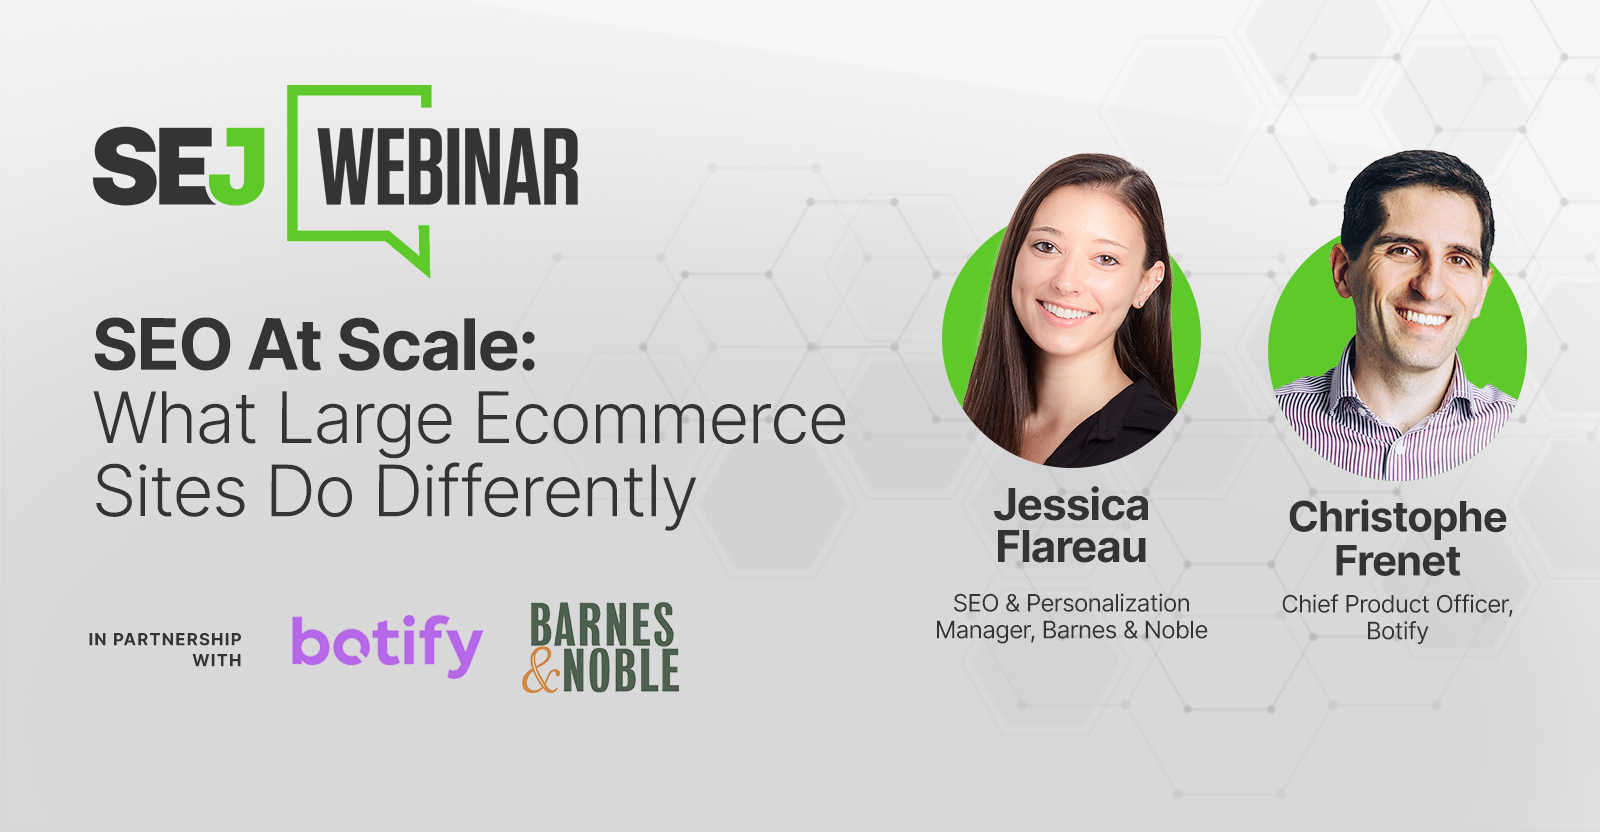 What Large Ecommerce Sites Do Differently